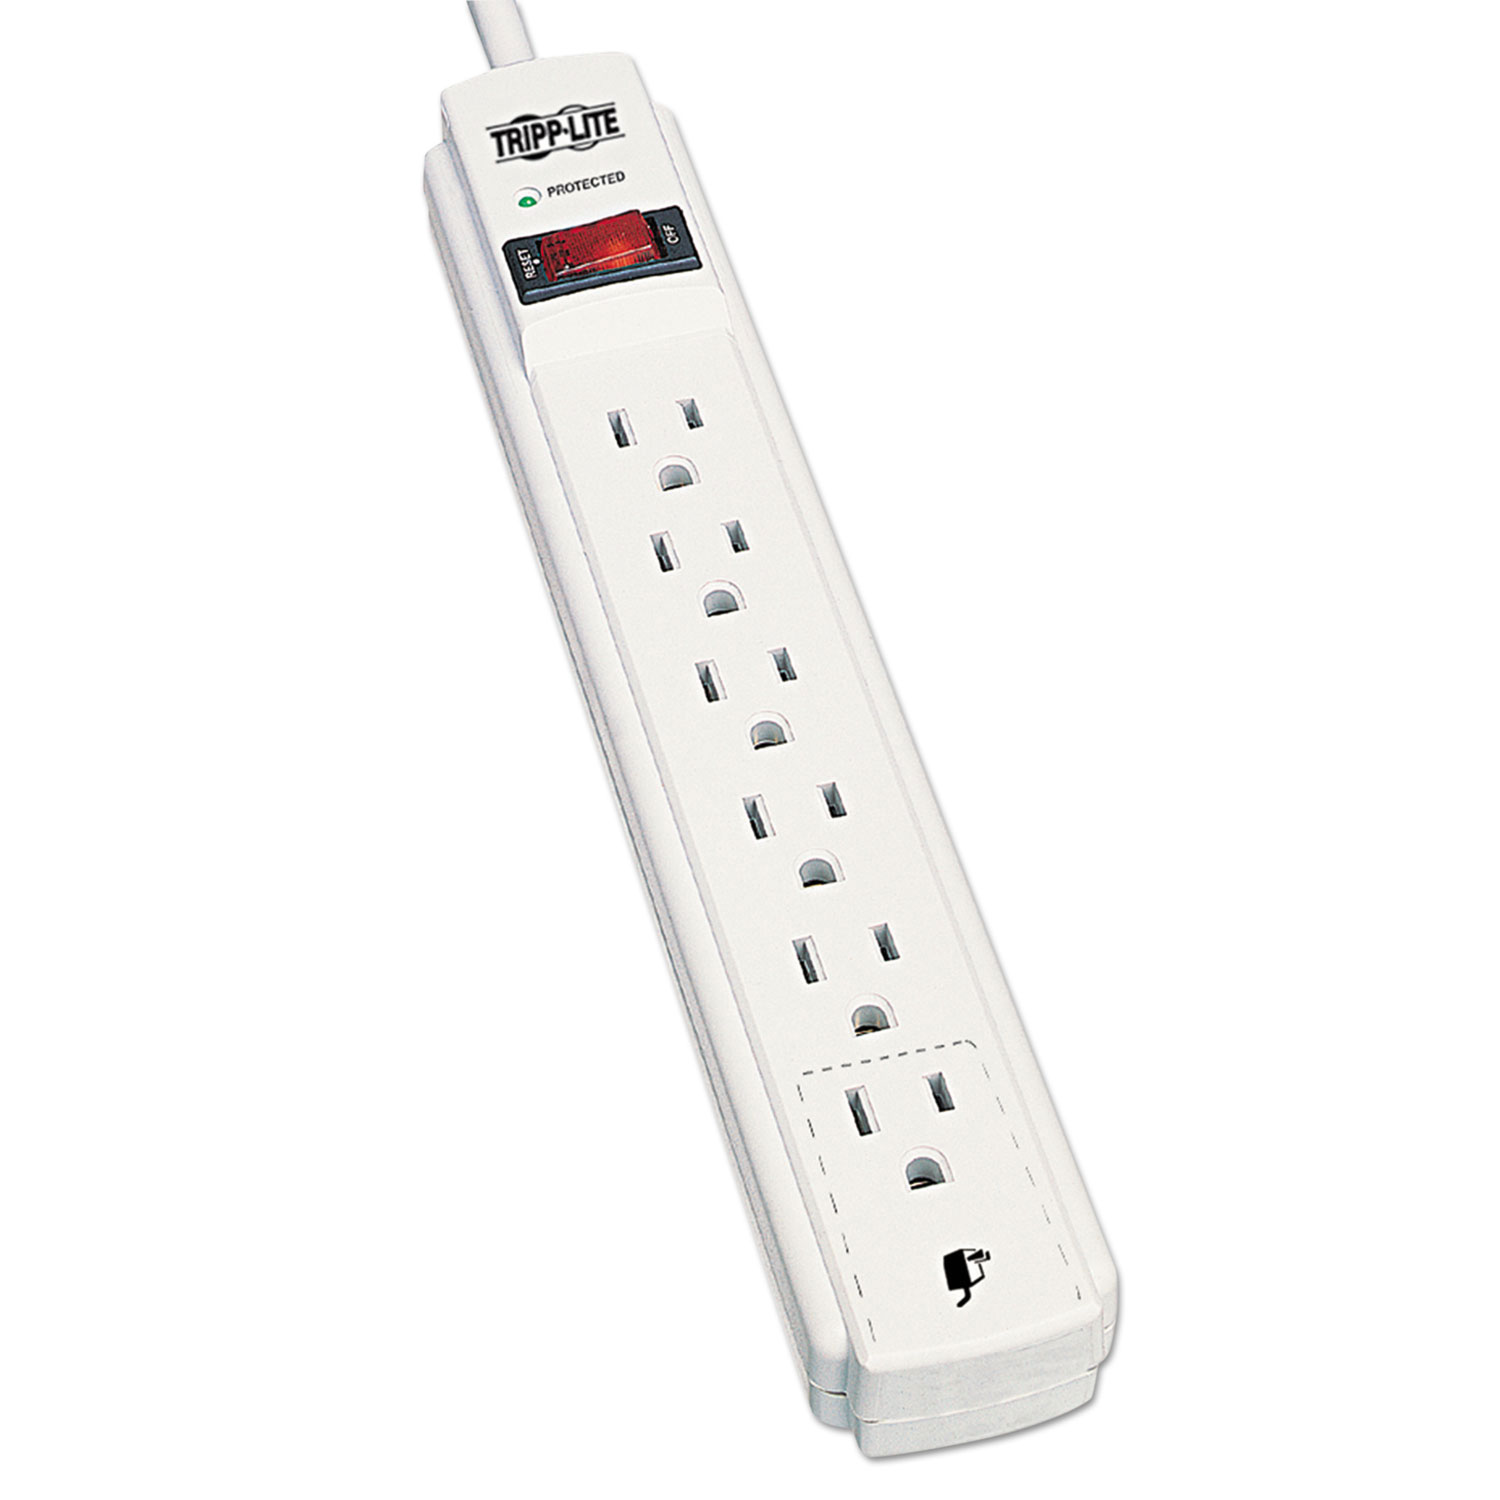 Protect It! Surge Protector, 6 Outlets, 4 ft. Cord, 790 Joules, Light Gray